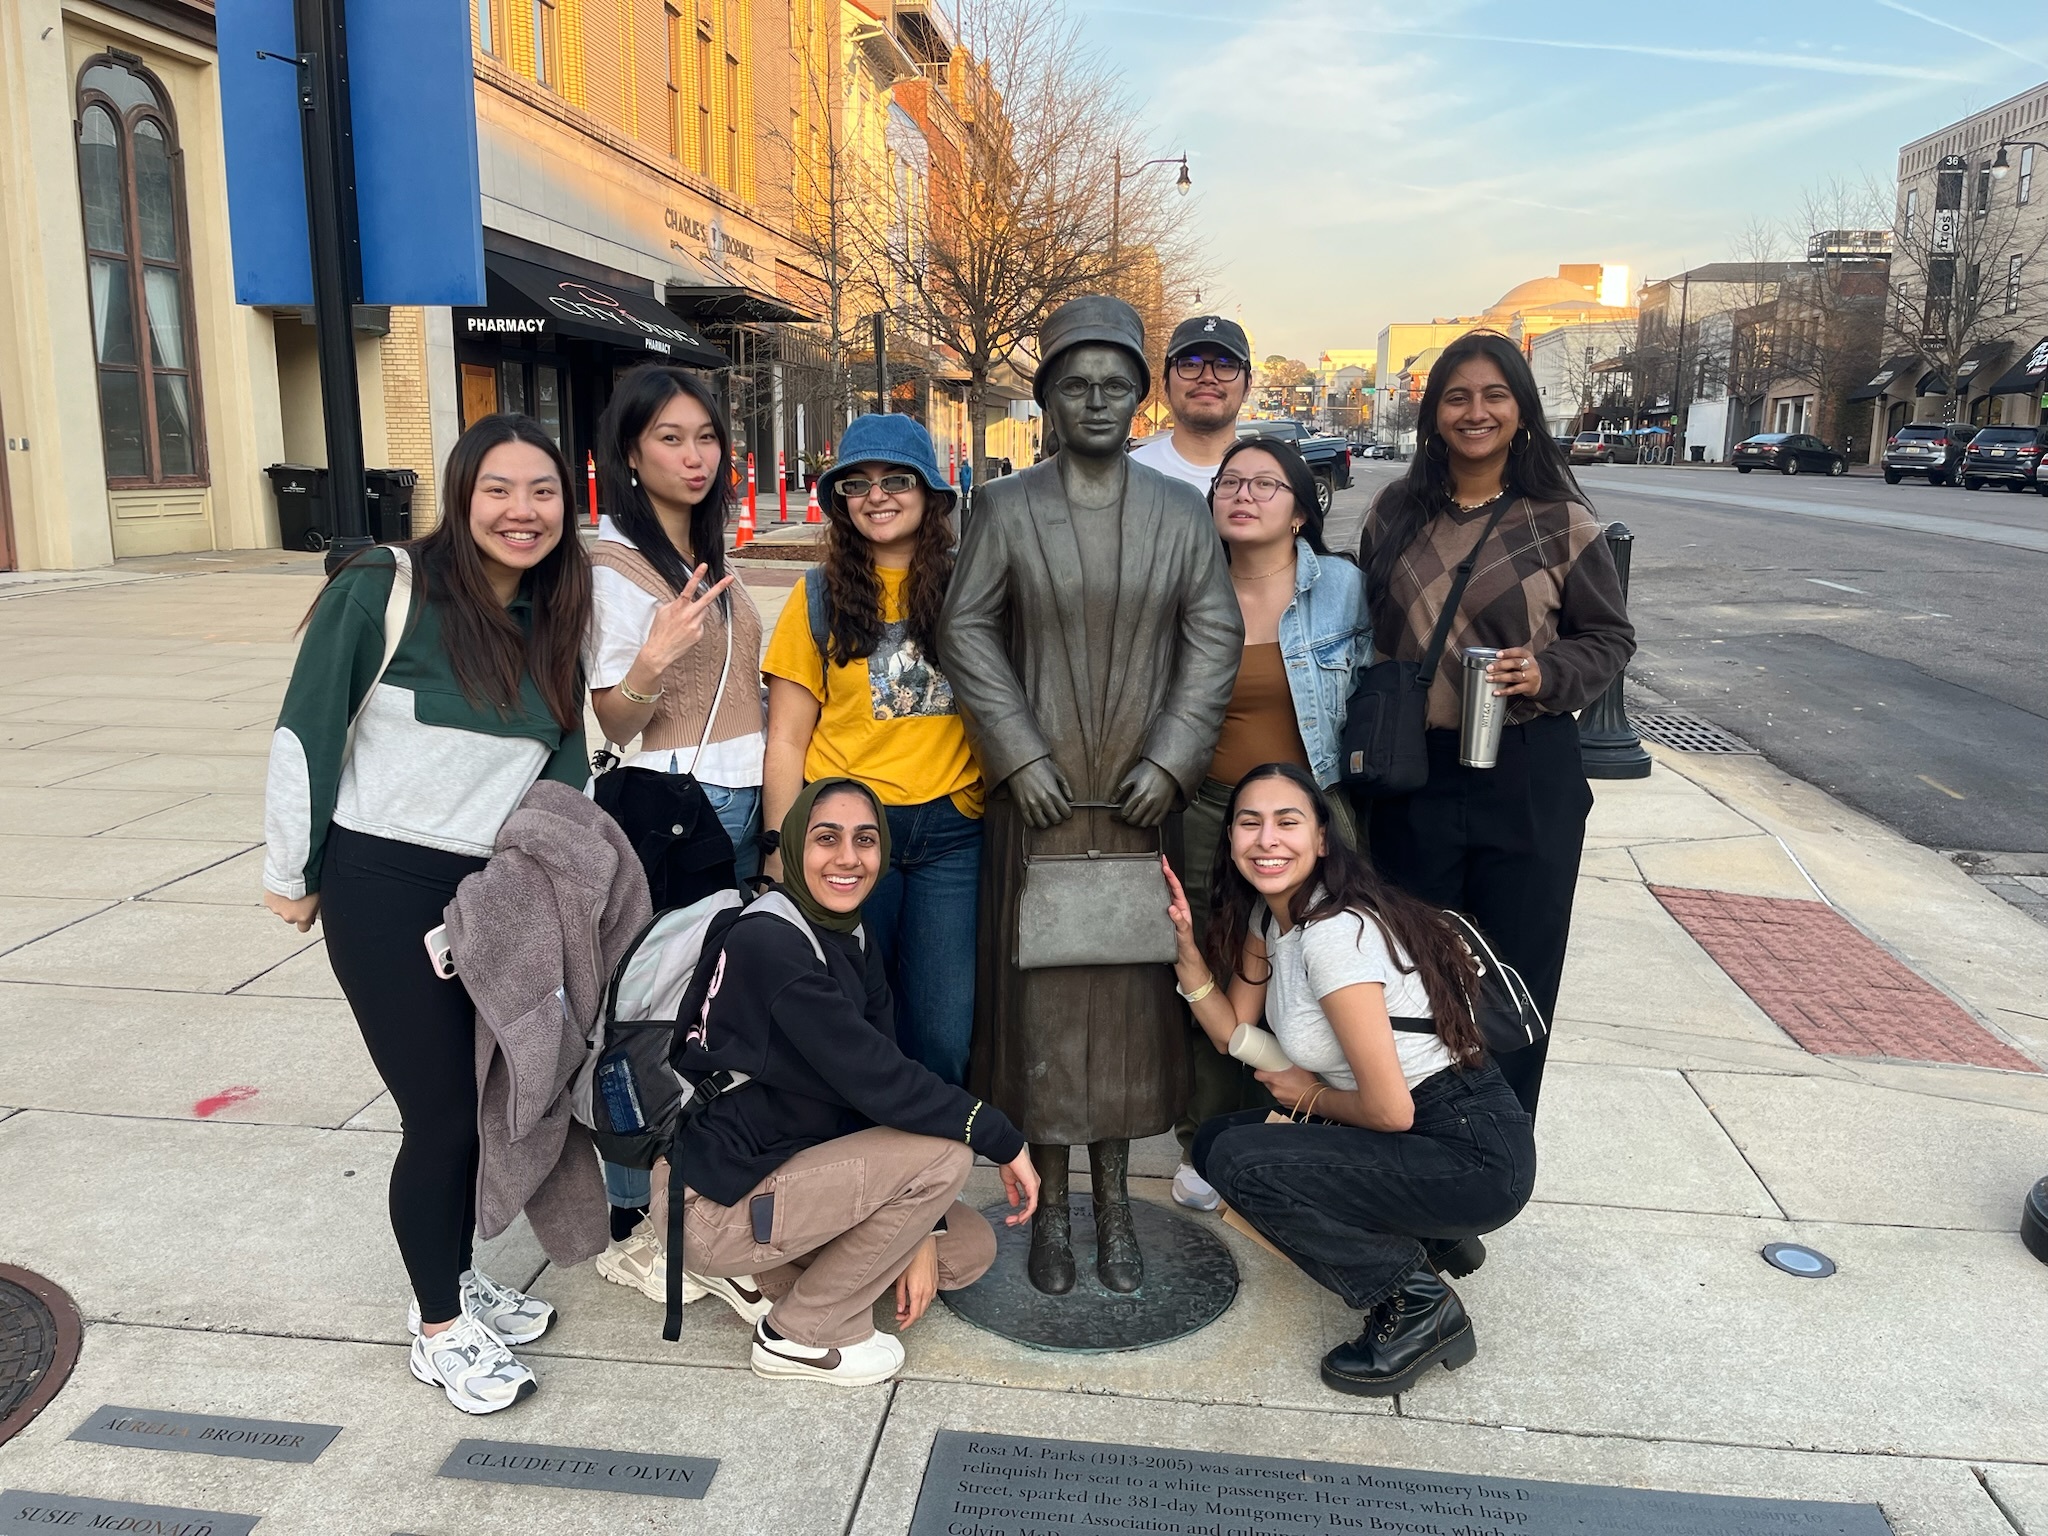 A group of 8 staff members (6 standing, 2 crouched) next to a statue of Rosa Parks at a bus stop in Montgomery, AL.